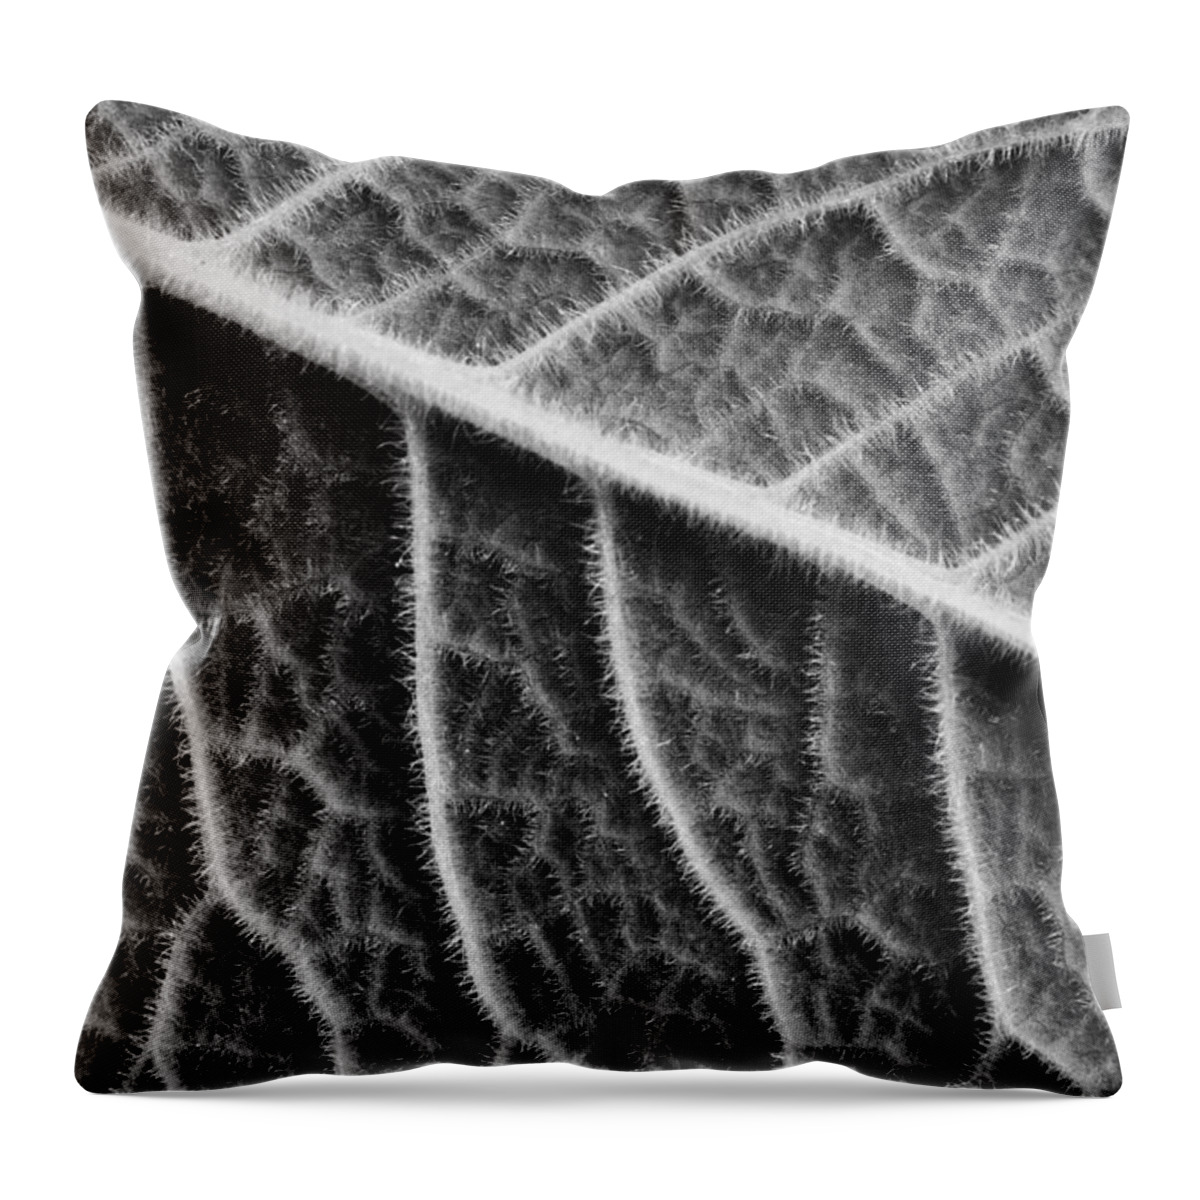 Plant Throw Pillow featuring the photograph Leaf #2 by Chevy Fleet